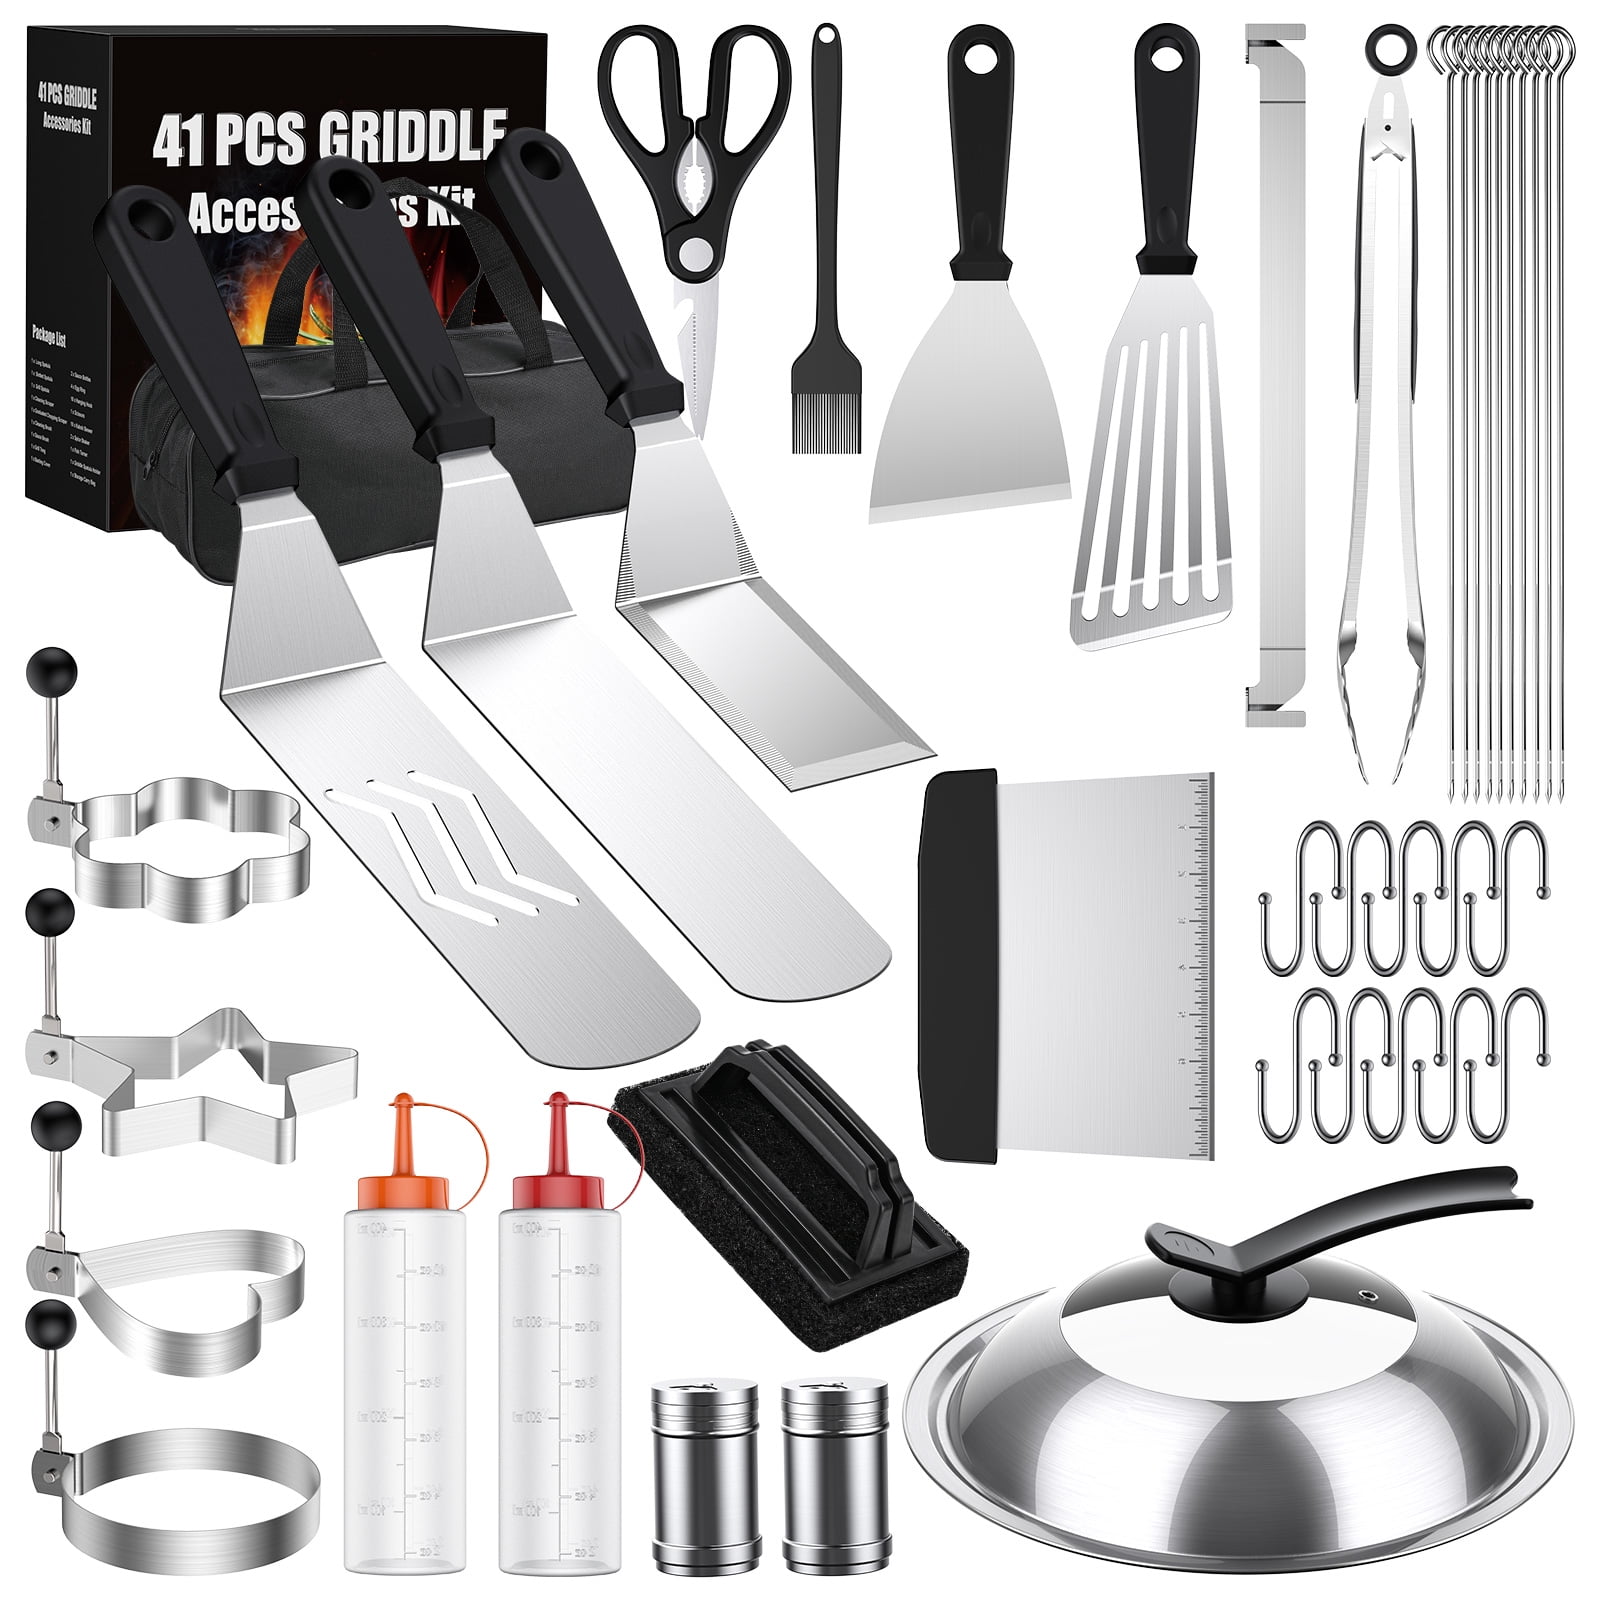 Ashihoti Official Griddle Accessories for Blackstone Grill Accessories,22pcs Stainless Steel Barbecue Tools Kit for Blackstone with Burger Smasher